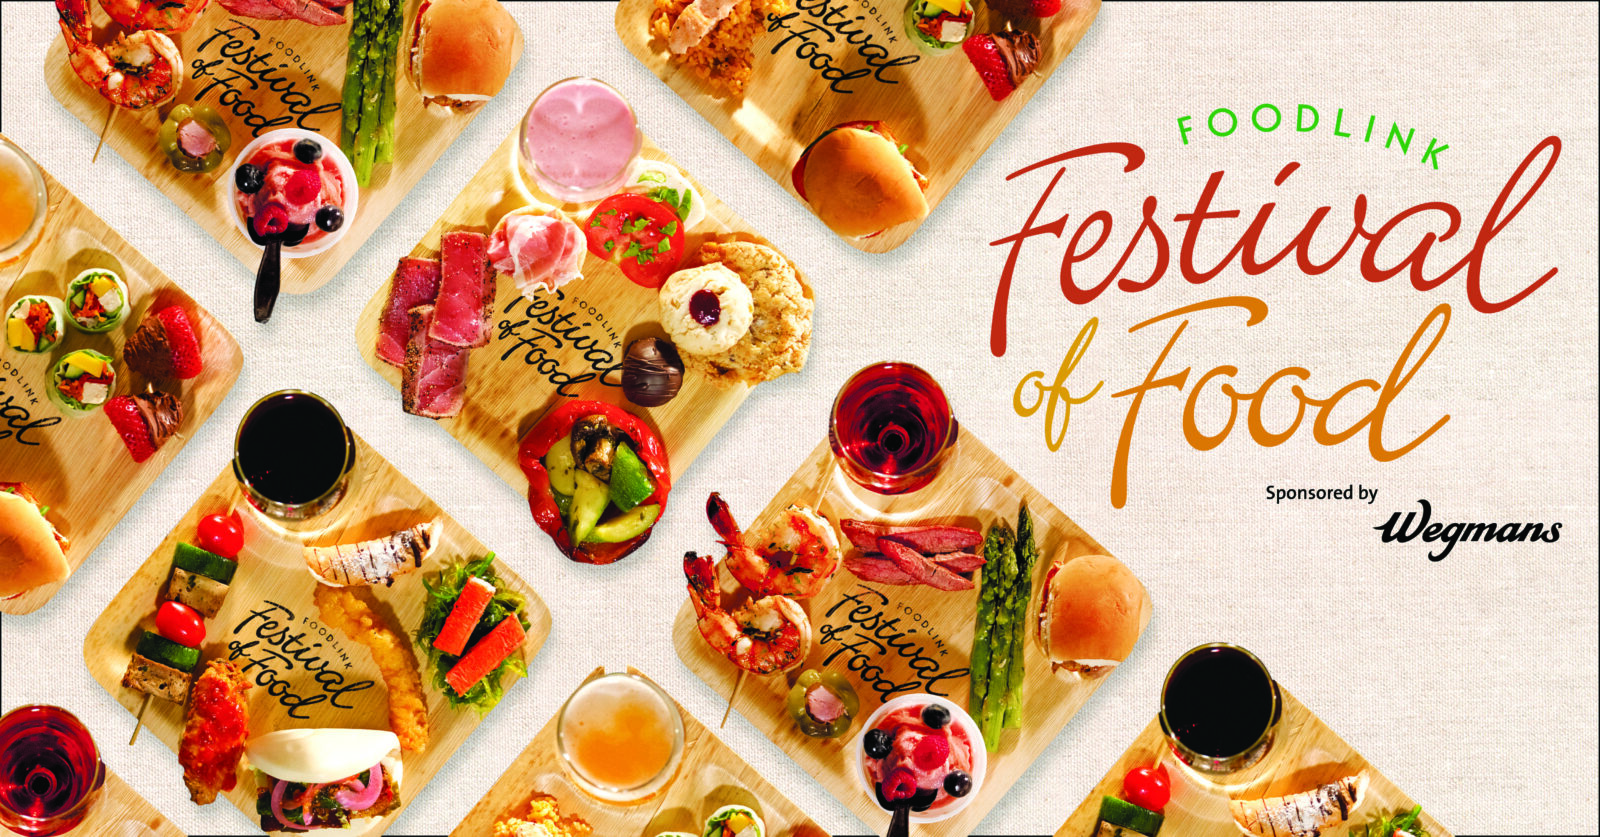 Festival of Food Rochester AList Rochester NY Events Rochester A